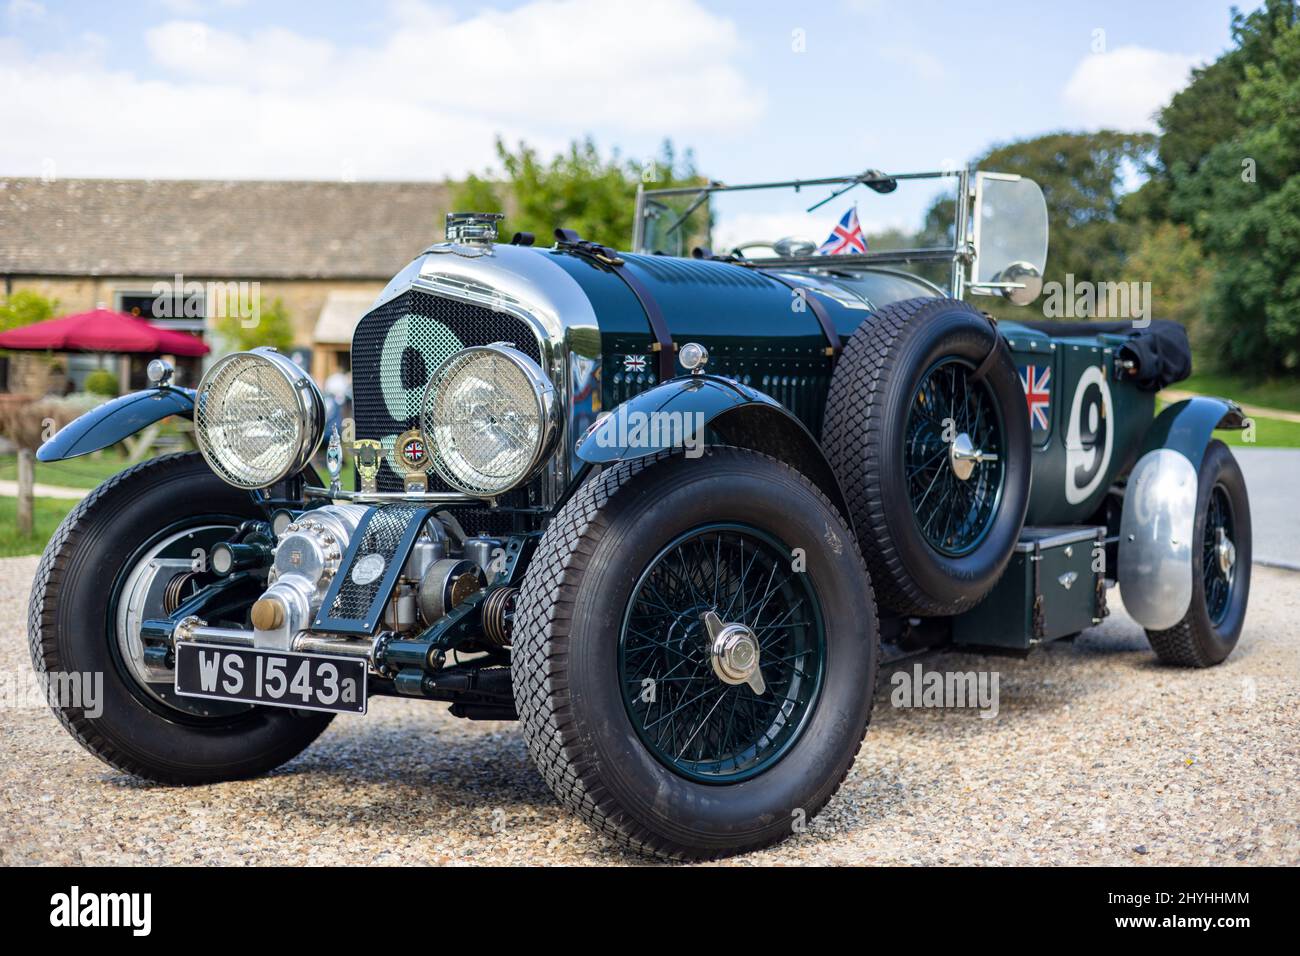 4 ½ LITRE SUPERCHARGED – THE ‘BLOWER’ BENTLEY Stock Photo